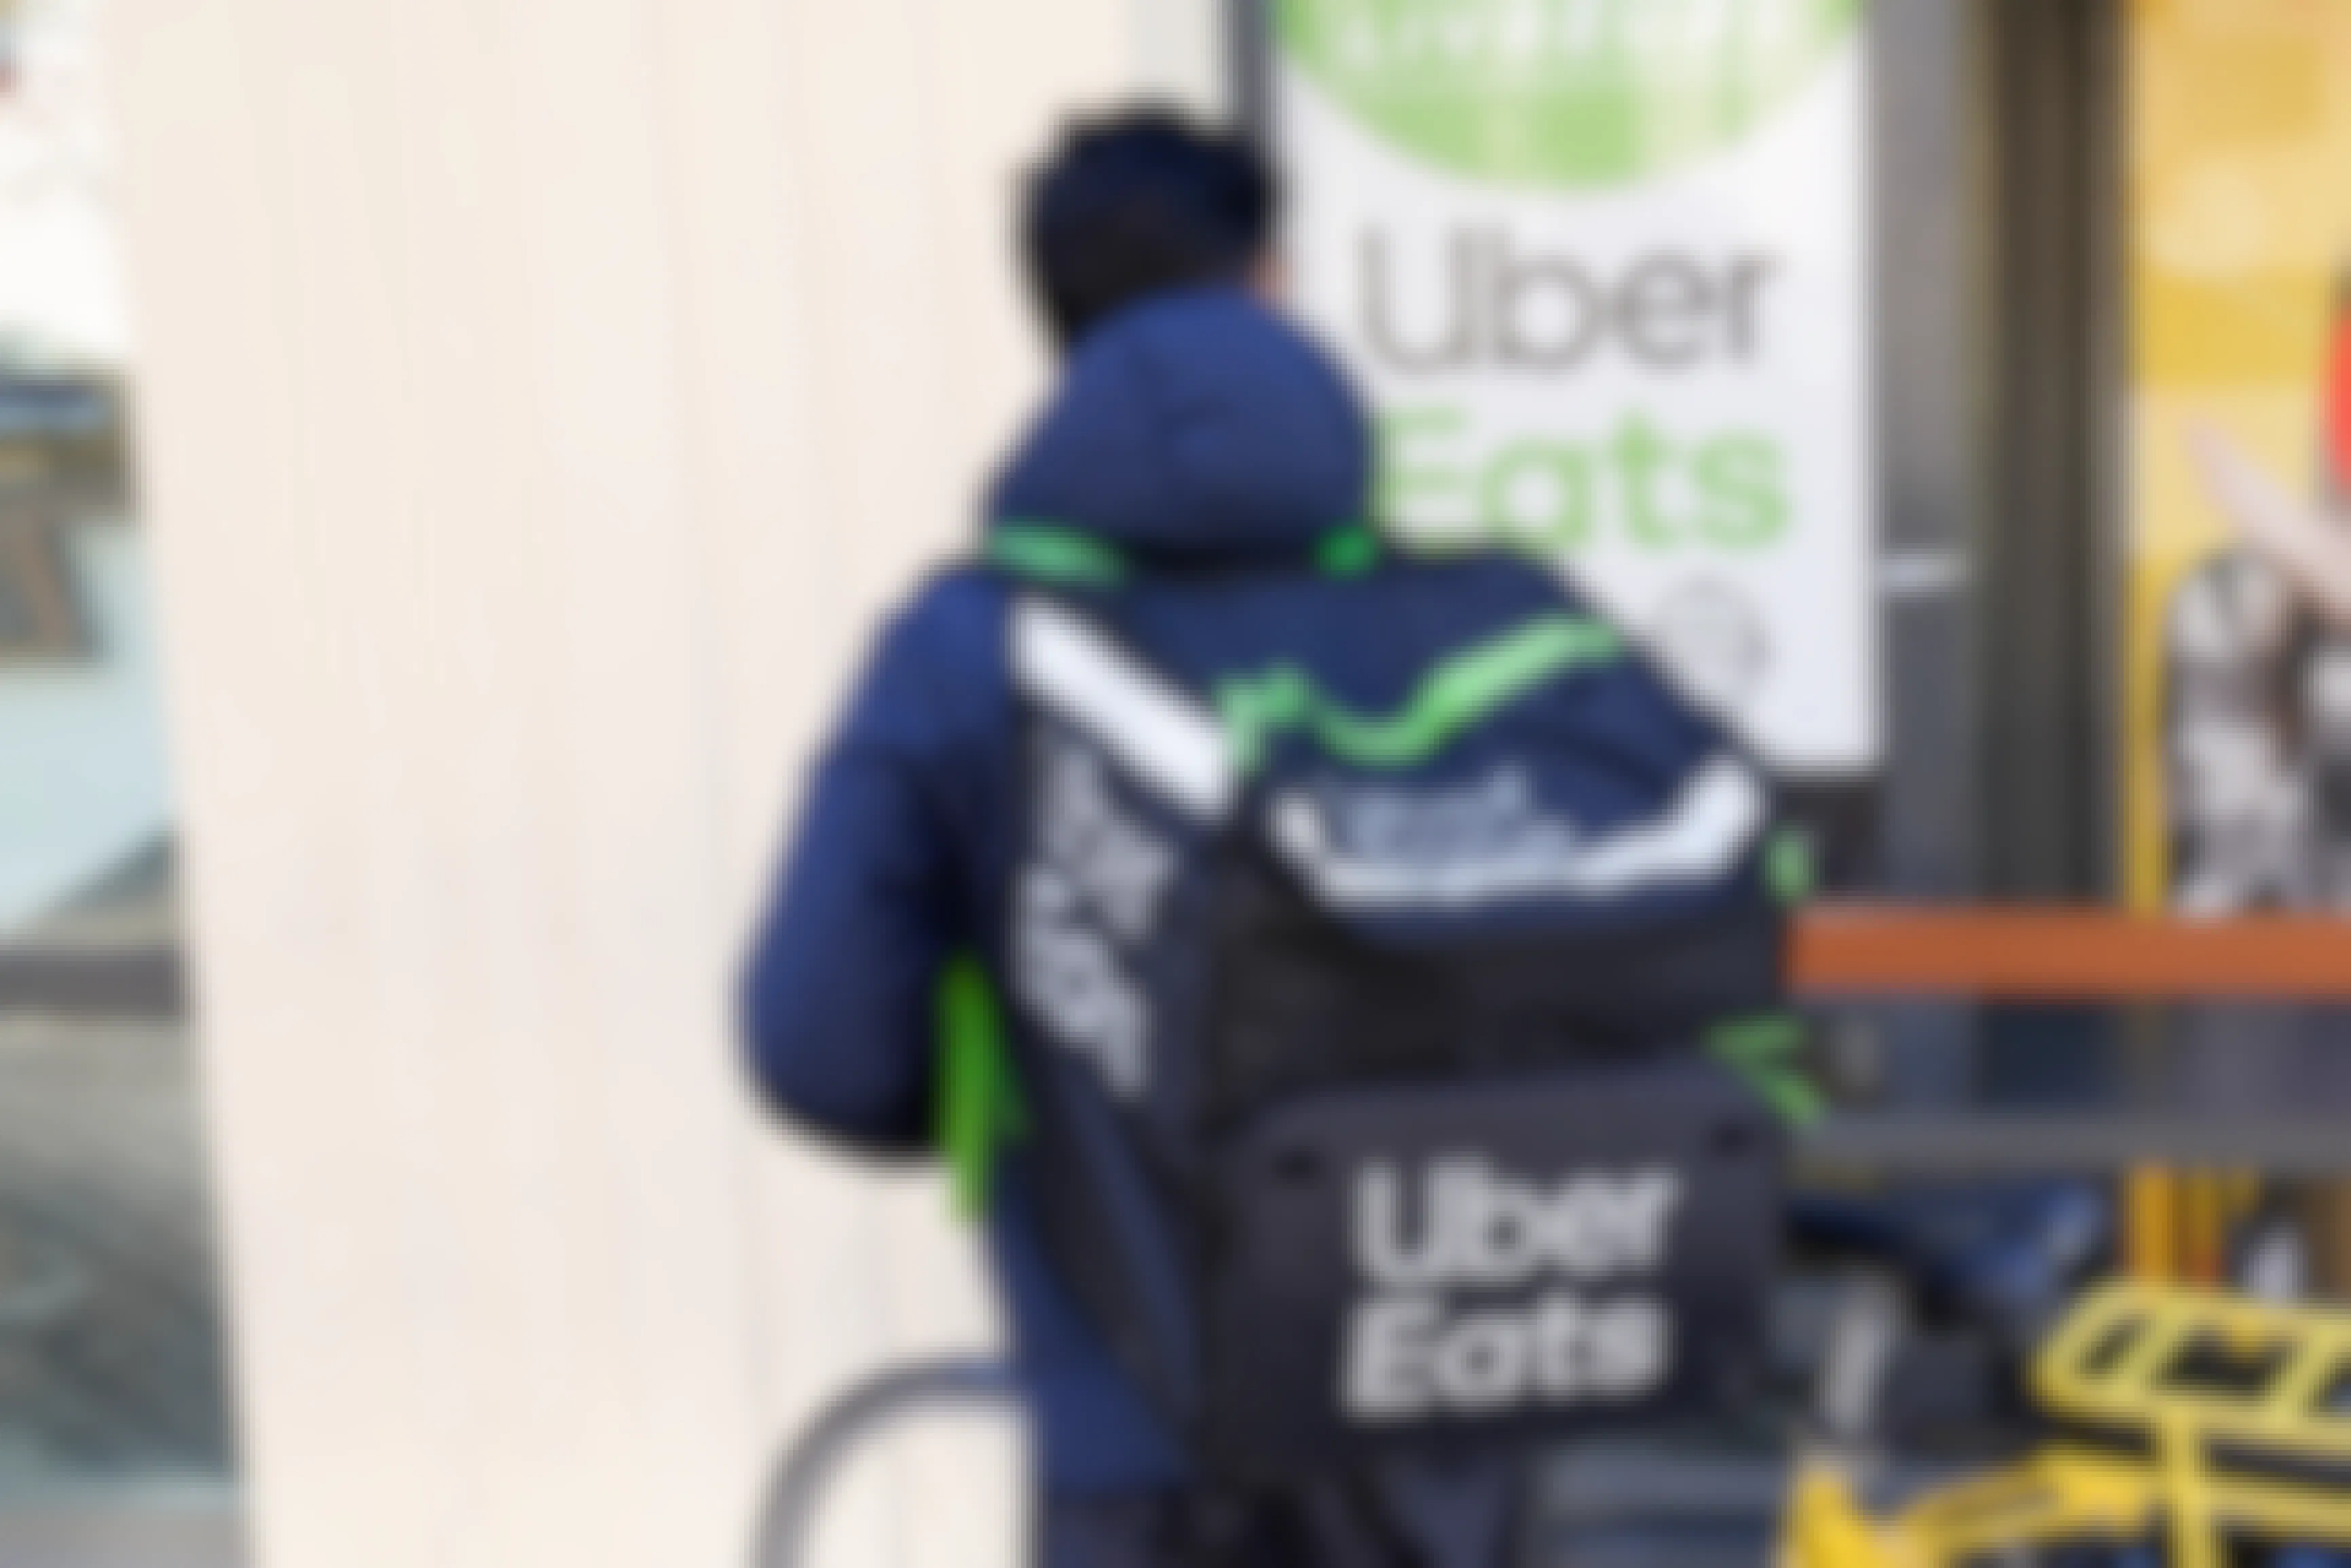 an uber eats delivery man on a bike with an uber eats backpack